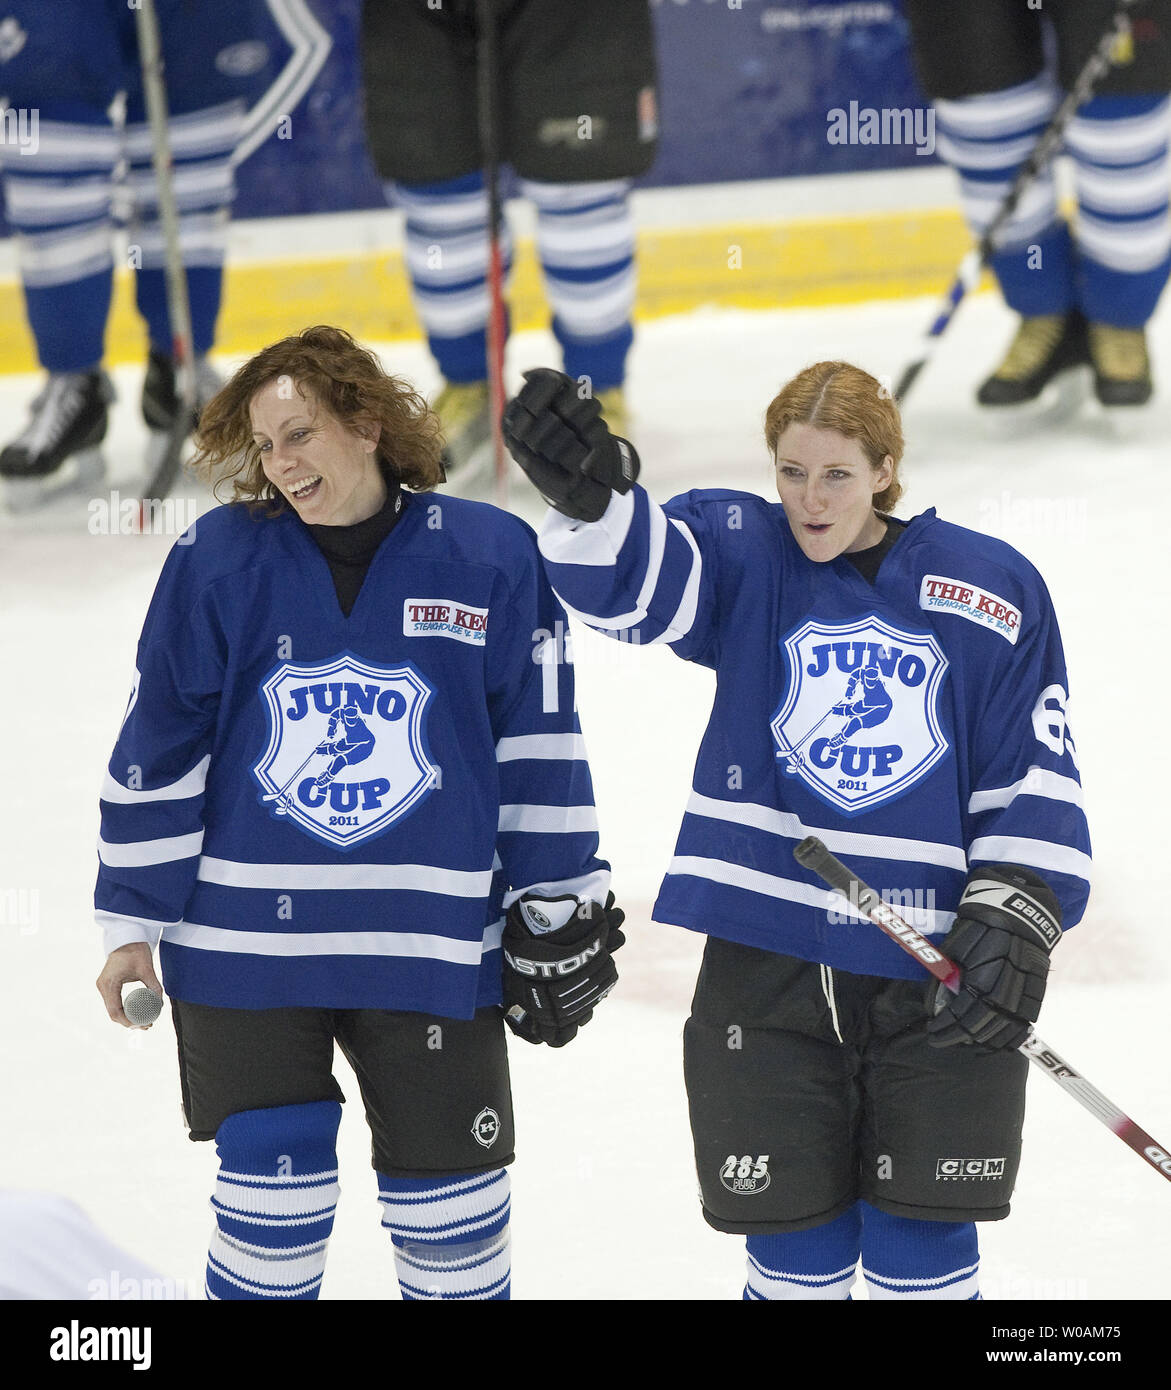 The Rockers Sarah Harmer (L) and Kathleen Edwards cheer at halftime of Juno Cup hockey against the NHL Greats at the Ricoh Center during the 2011 Juno Awards in Toronto, Ontario, March 25, 2011.   UPI Photo /Heinz Ruckemann Stock Photo